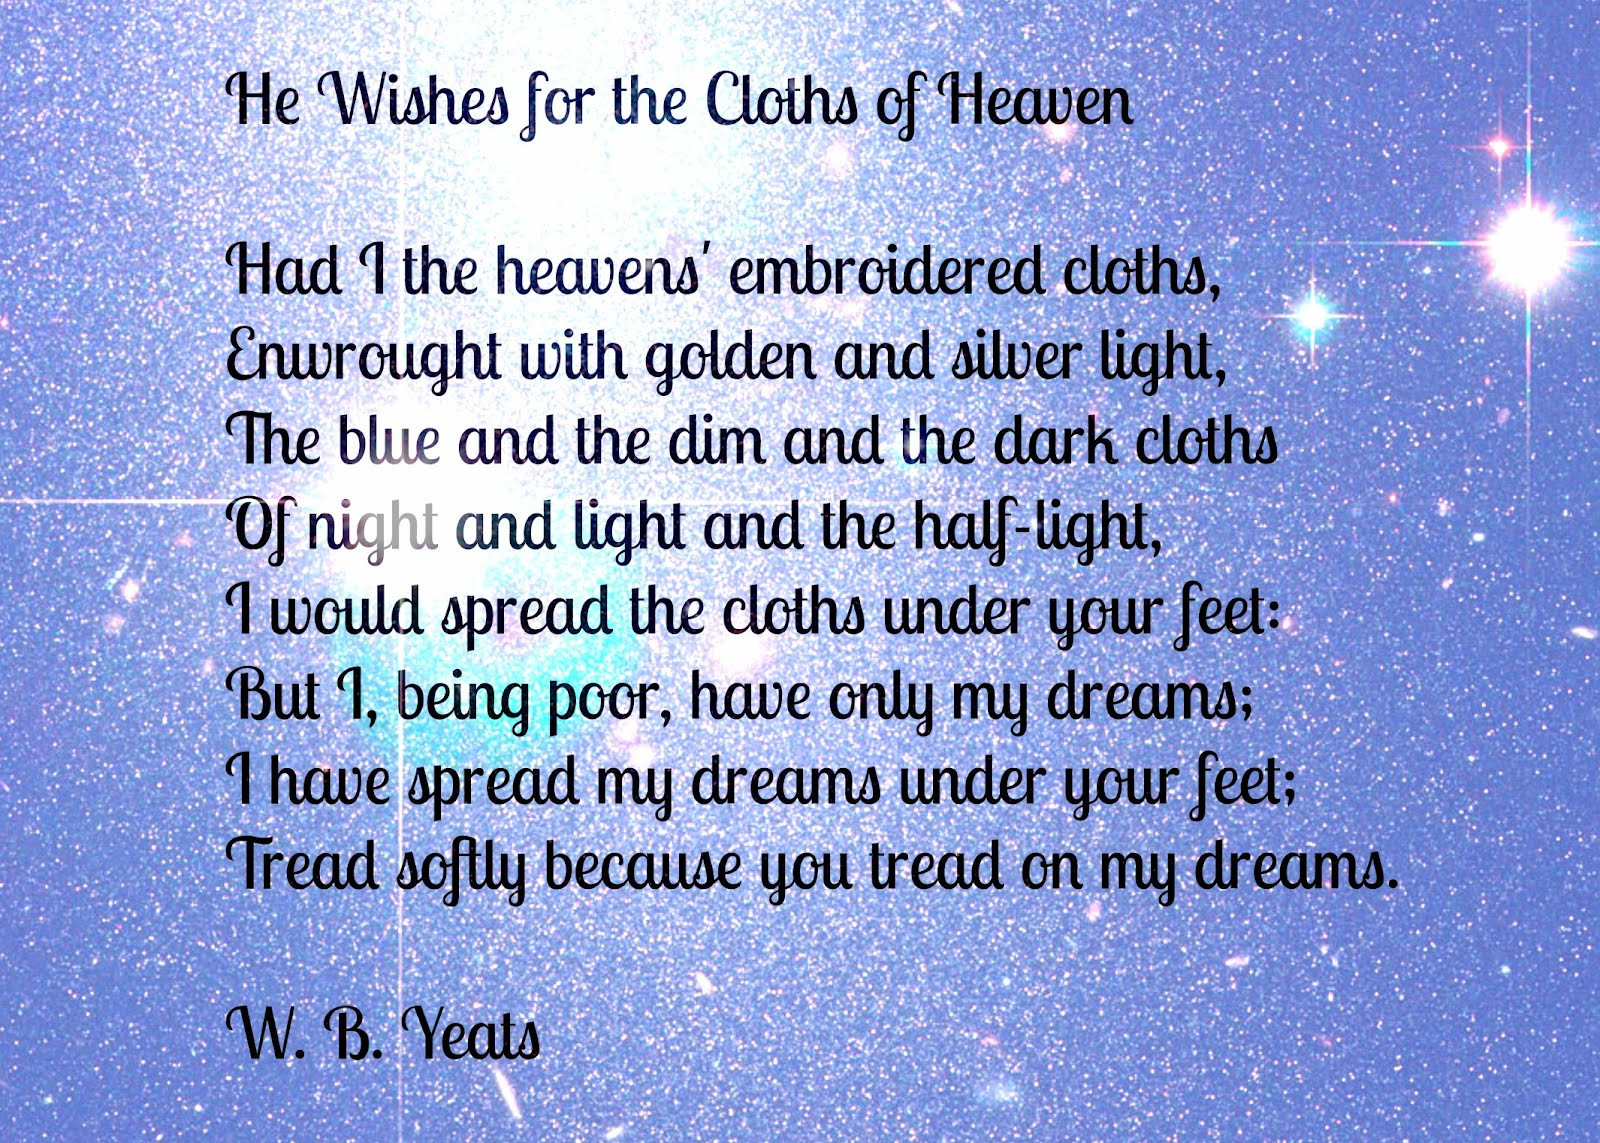 Birthday Wishes To Heaven
 THE WRITE SISTERS 08 01 2012 09 01 2012